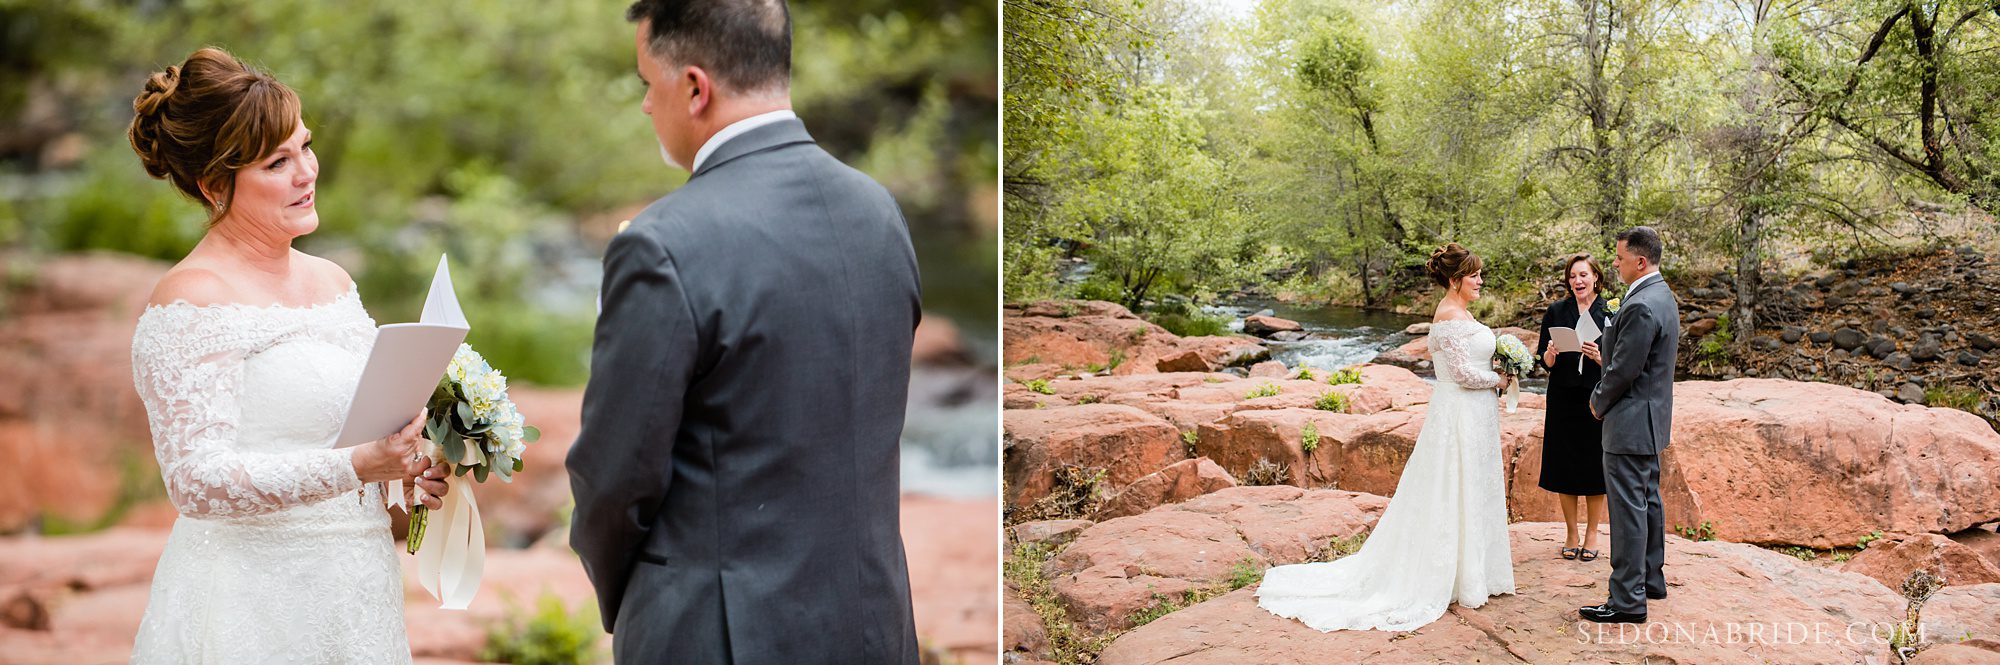 Couple exchanges vows on Serenity Point with Oak Creek in the background during their elopement in Sedona